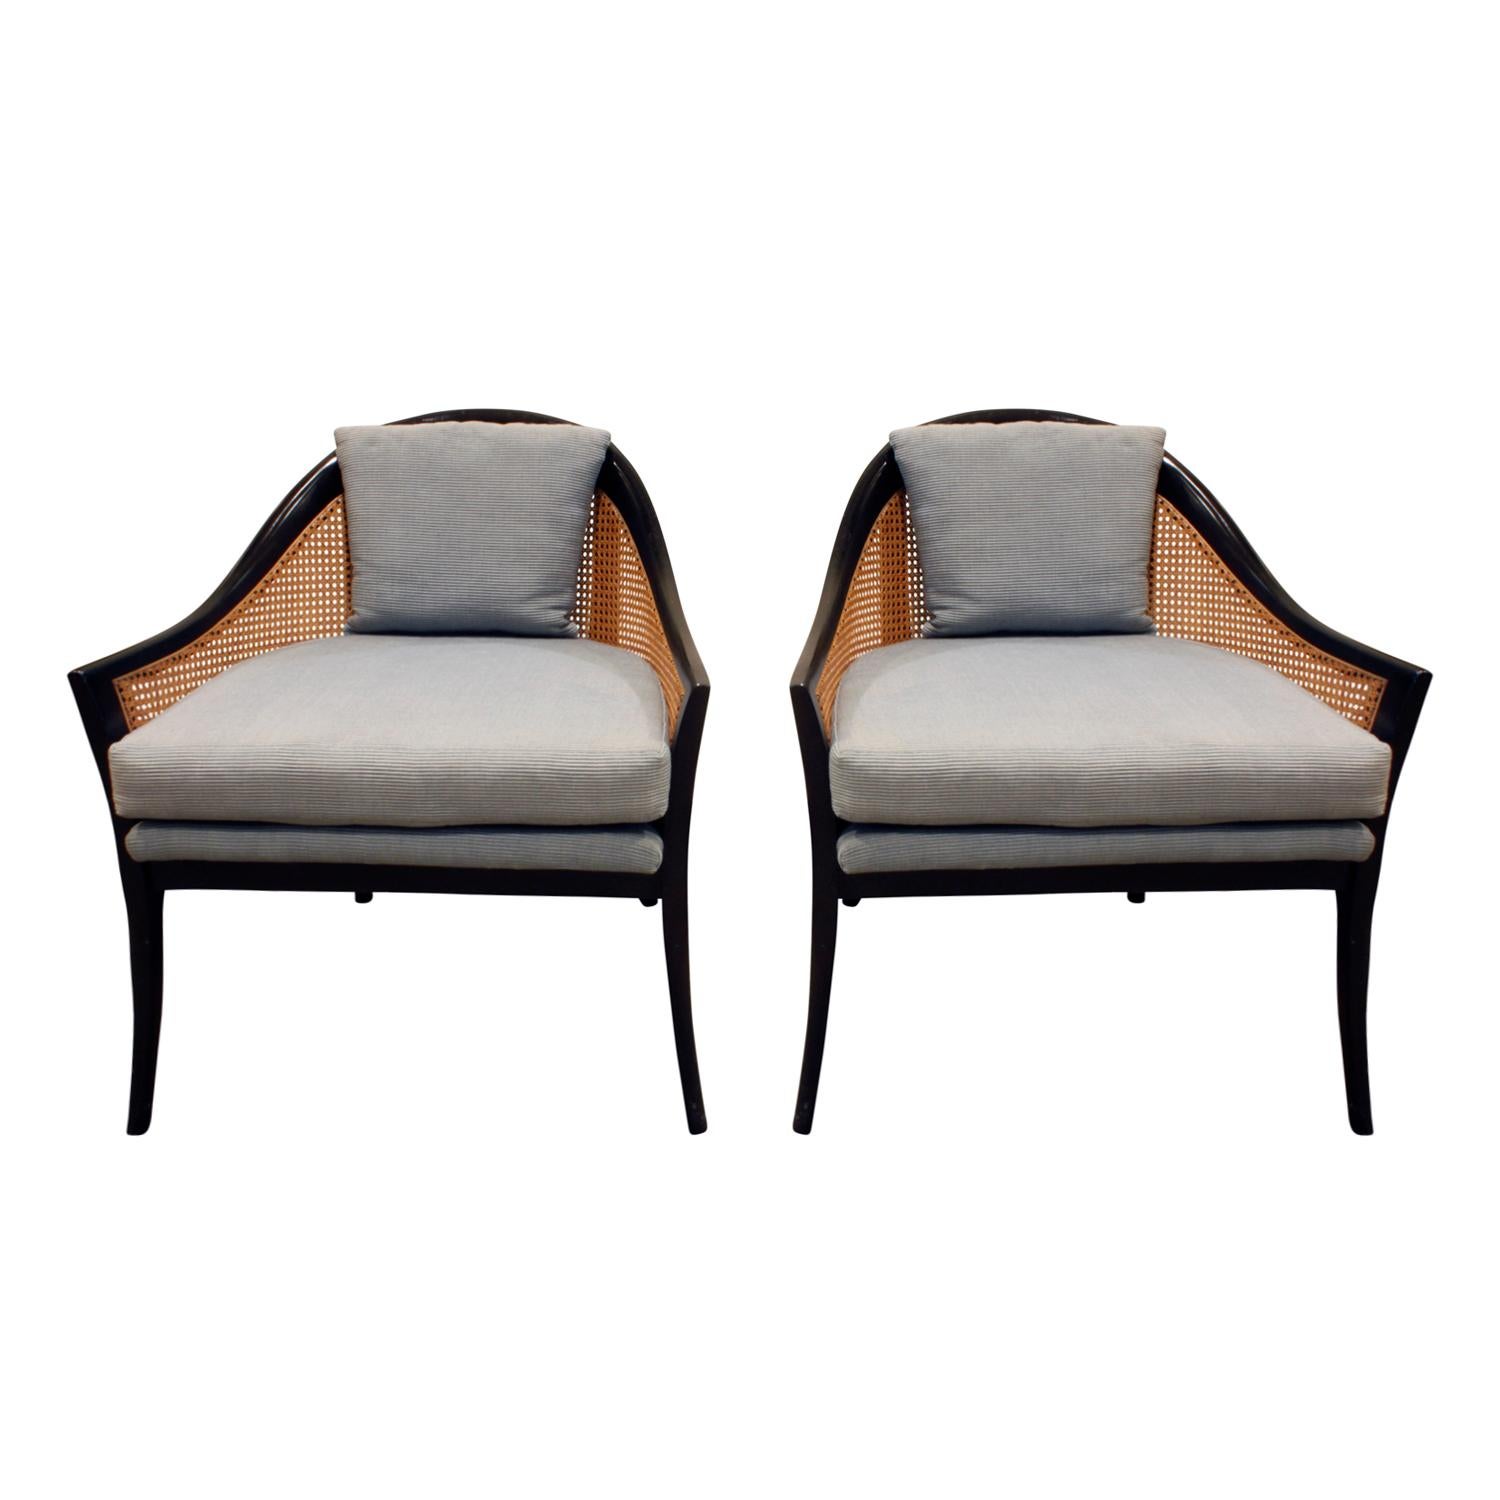 Harvey Probber Elegant Pair of Lounge Chairs with Caned Backs and Sides, 1950s